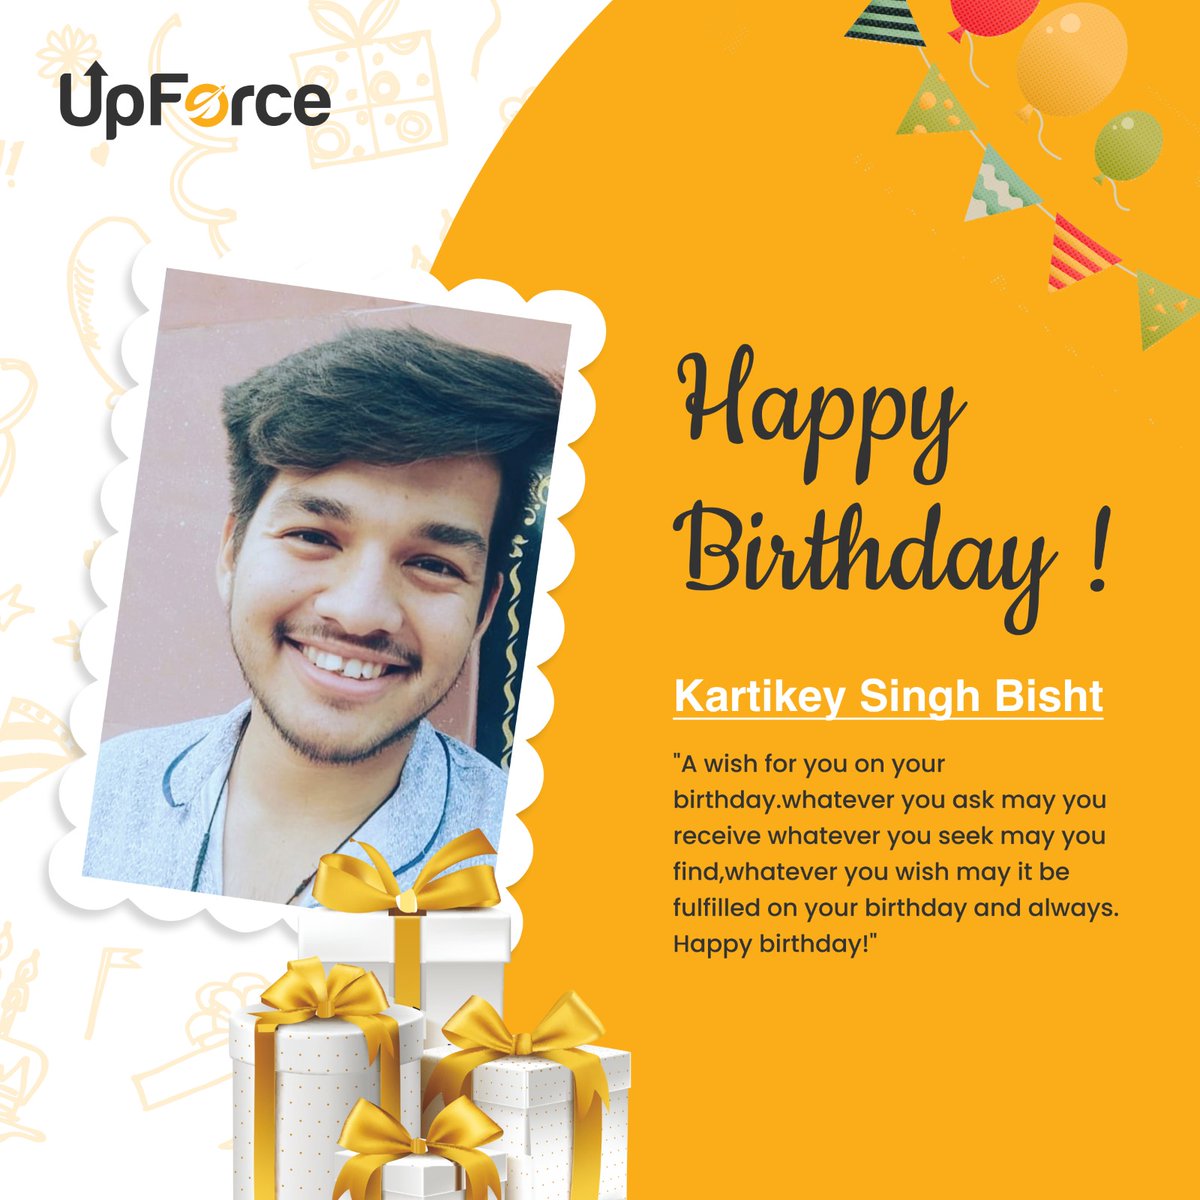 Cheers to another year of growth, success, and celebration! 🎉 Happy birthday to our incredible team member at UpforceTech. Your dedication and hard work inspire us every day. Here's to making more memories together! 🎂🎈 #TeamUpforceTech #HappyBirthday